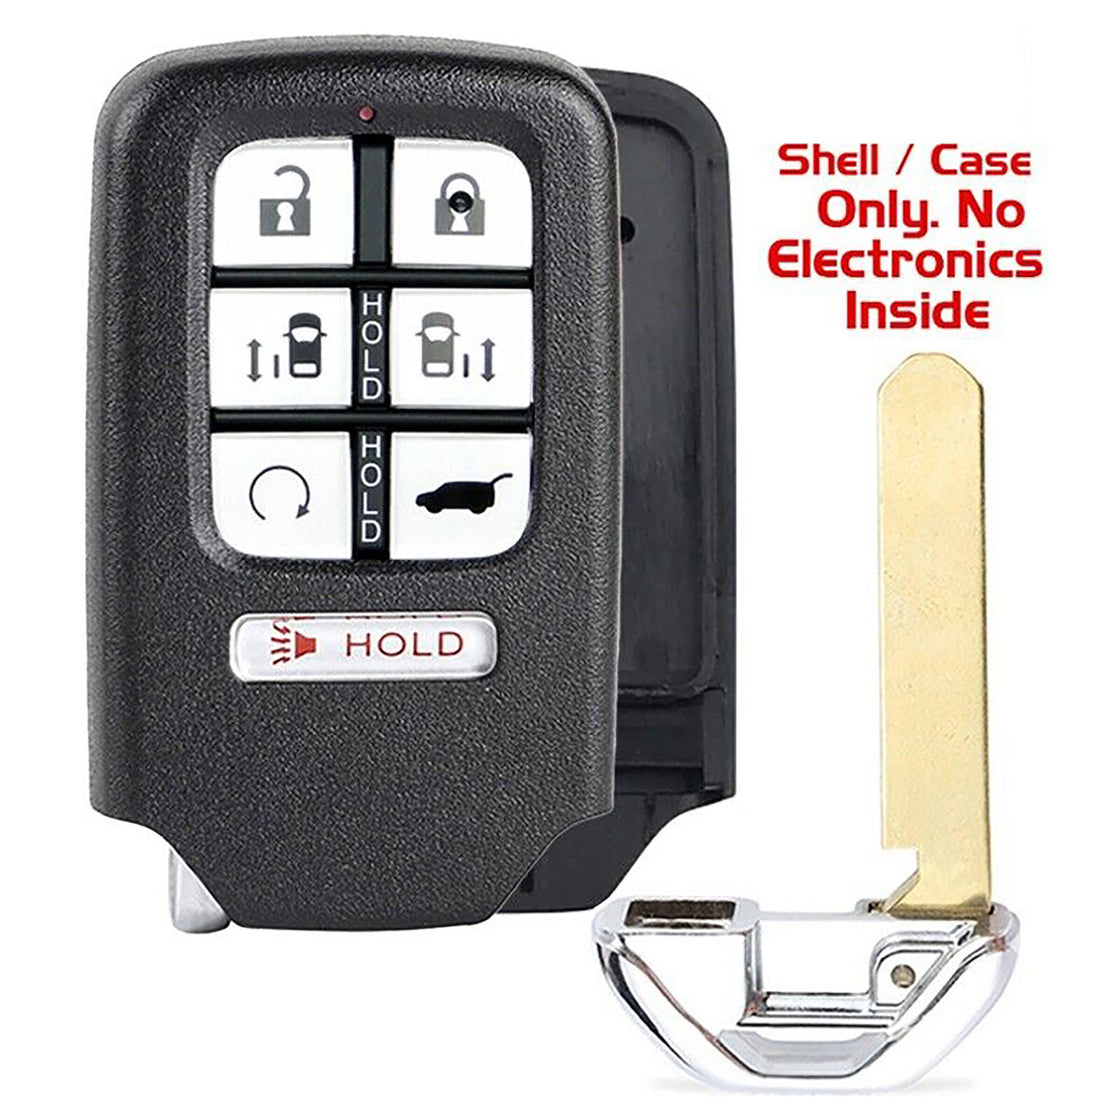 1x New Replacement Proximity Key Fob SHELL / CASE Compatible with & Fit For Honda Vehicles - MPN KR5V2X-SHELL-02 (NO electronics or Chip inside)